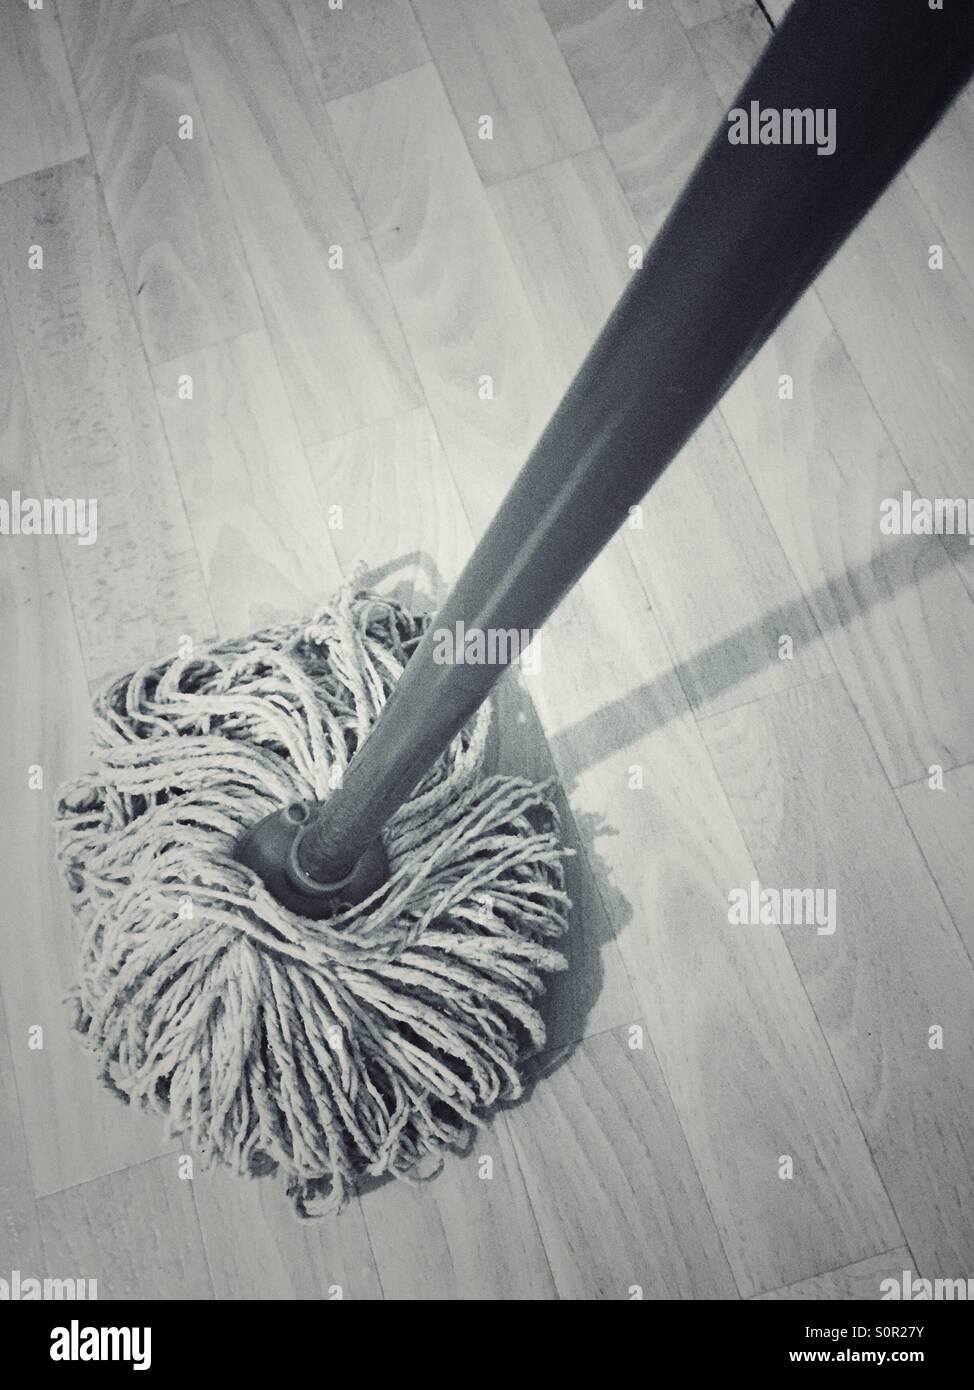 Mopping the floor Stock Photo